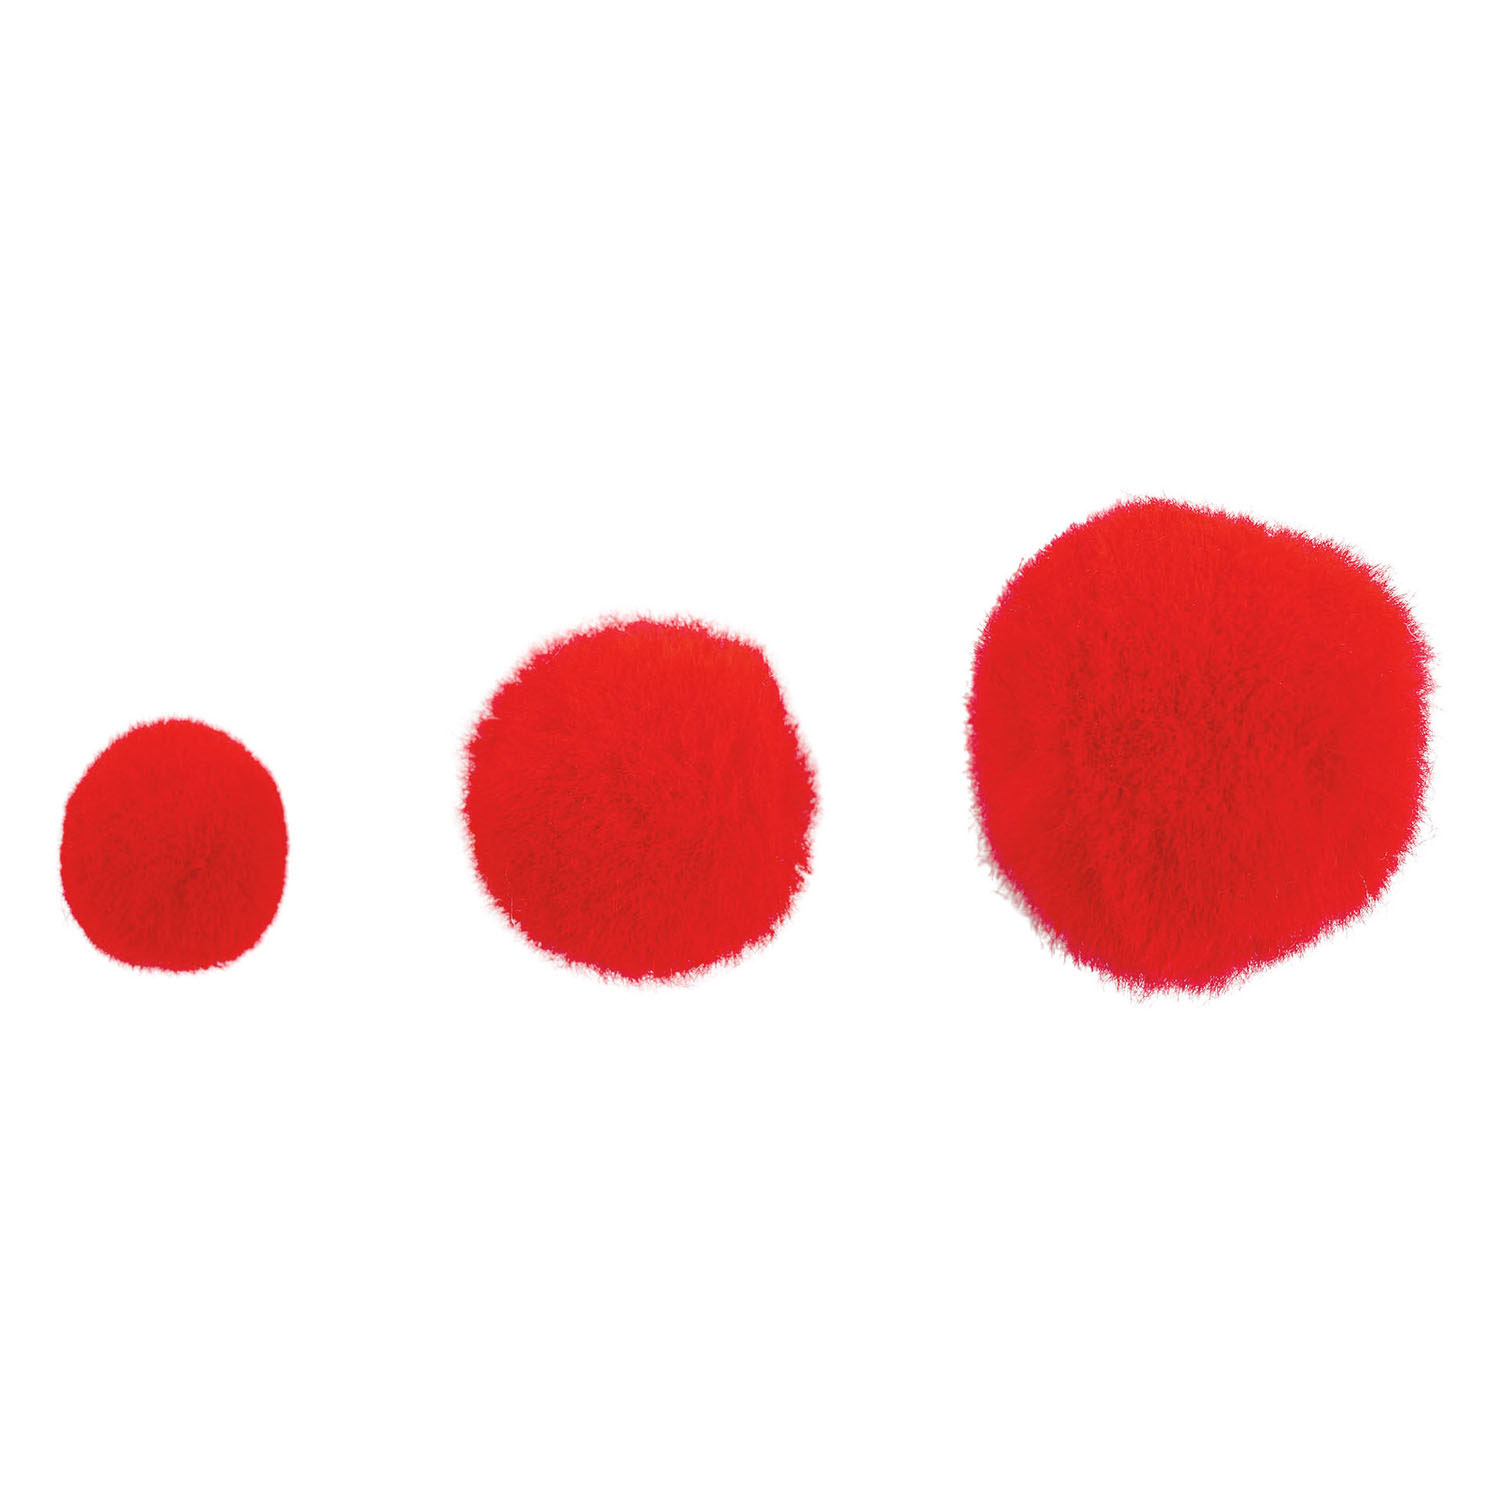 Colorations - Pom Poms Rood, 100st.